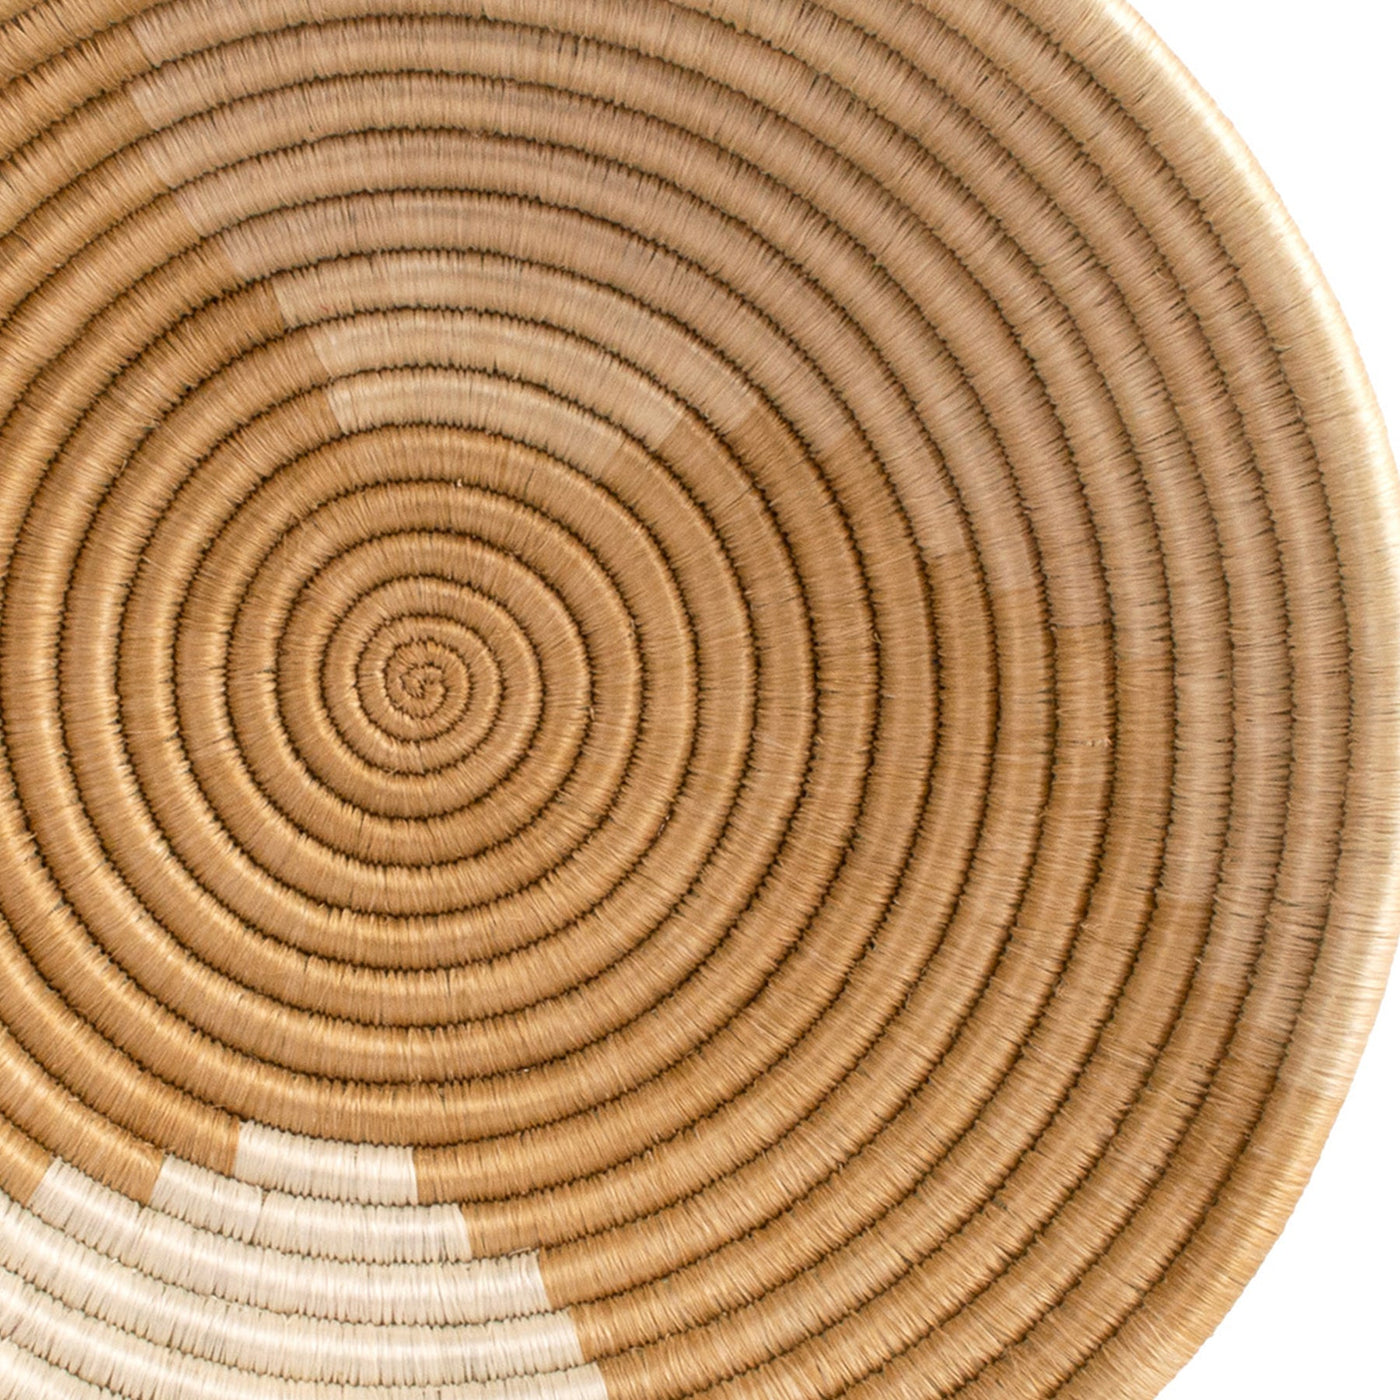 Sand Woven Bowl - 12" Refined